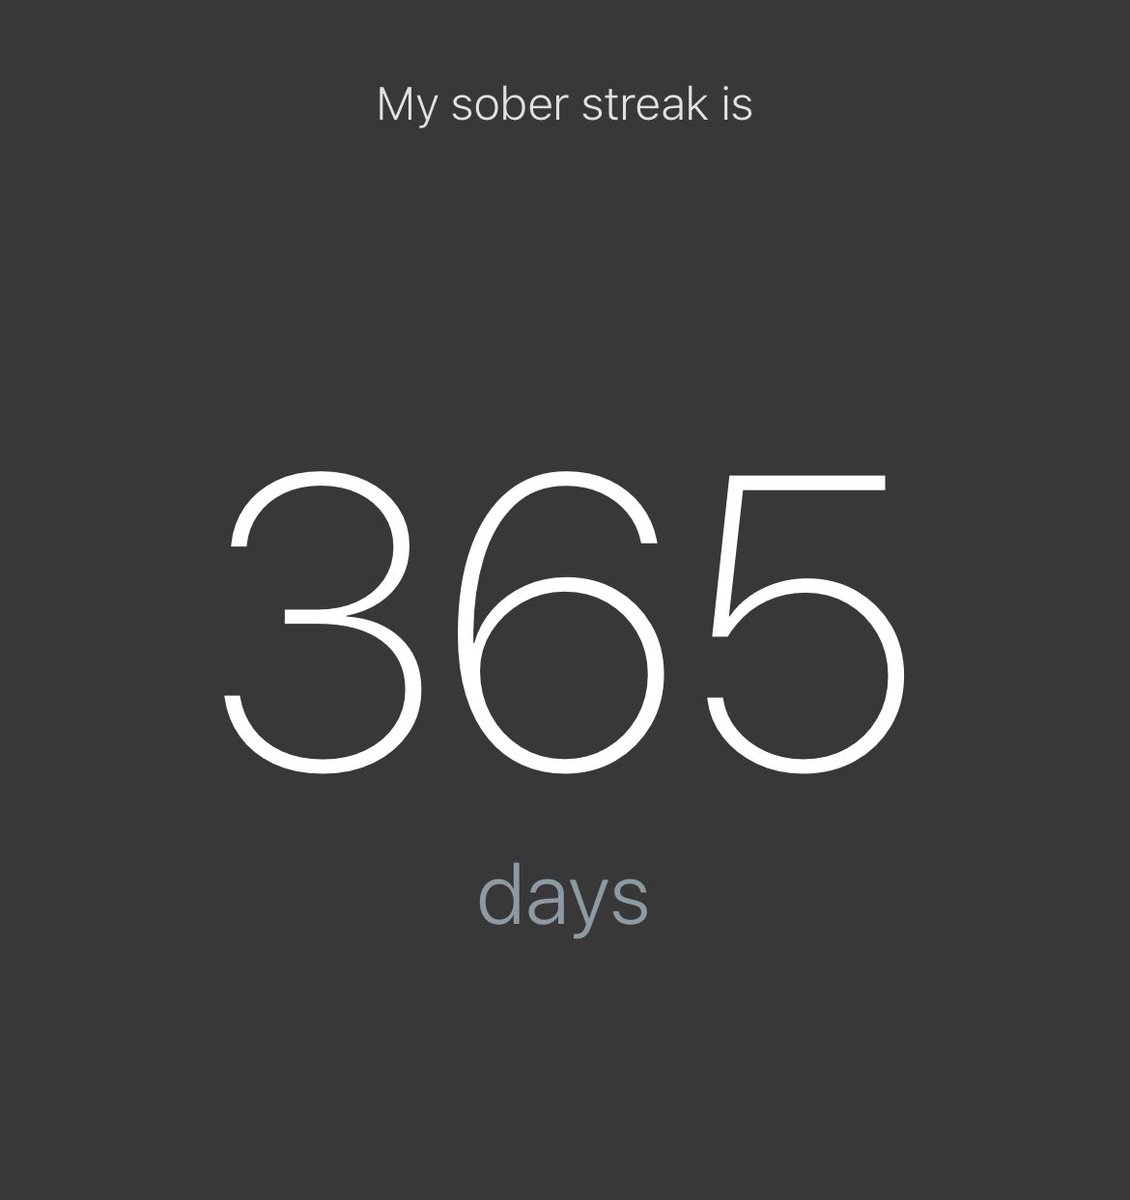 The proudest moment 🥹 

Proving the doubters wrong who said I wouldn't last 7 days. Well look at me now, 365 days later and I'm still sober😜

#sober #sobriety #soberjourney